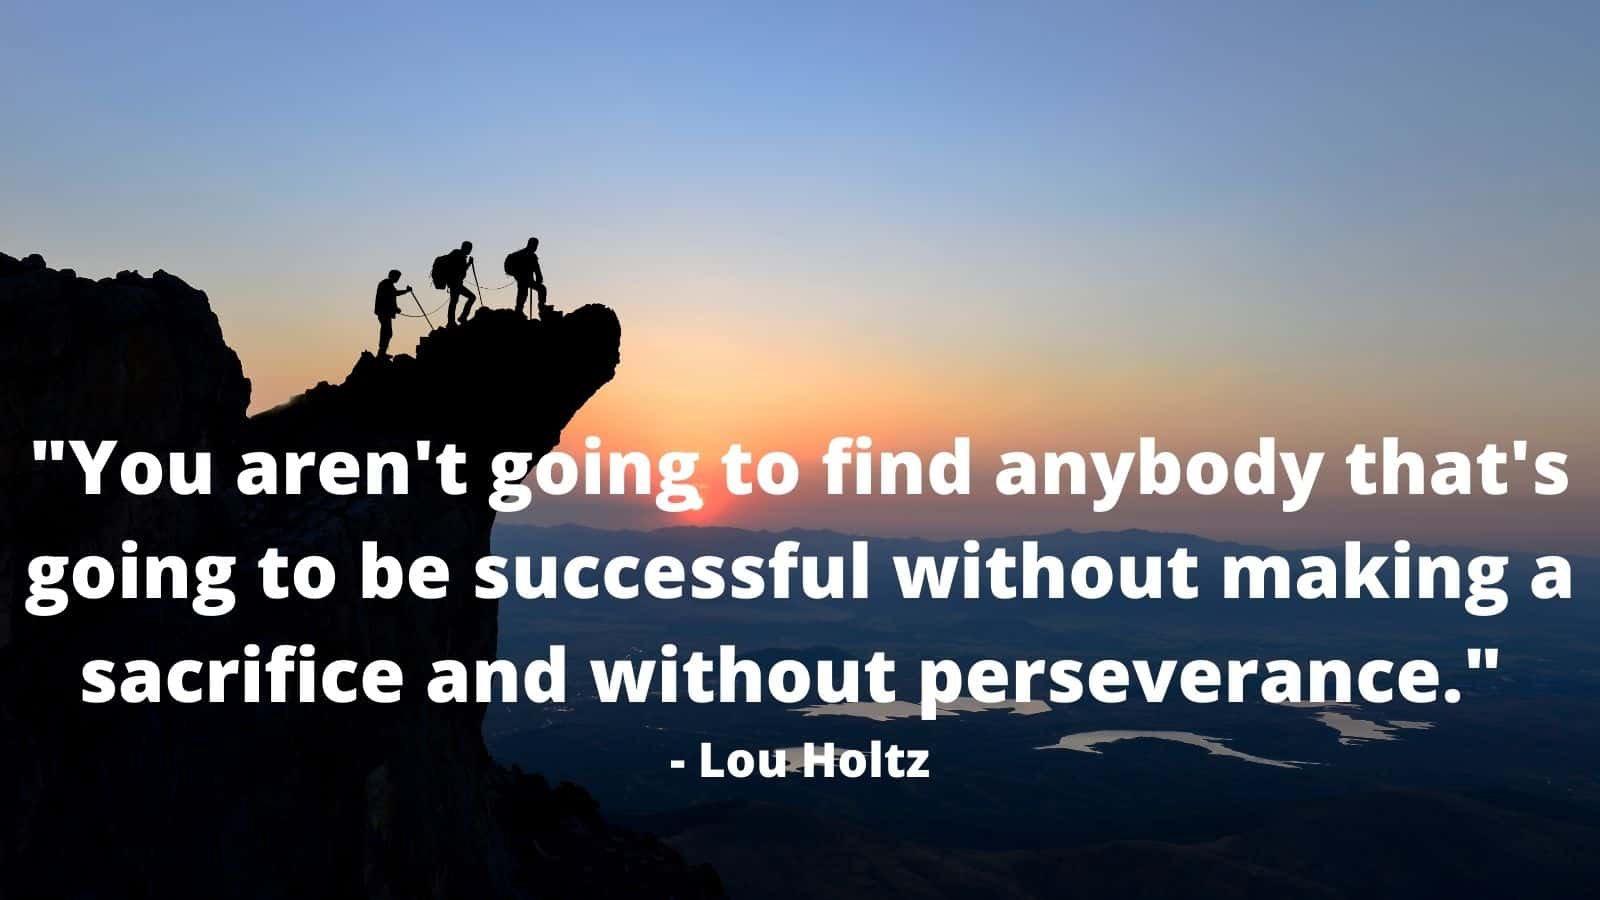 15 Quotes About Perseverance To Motivate Success | 6 Minute Read